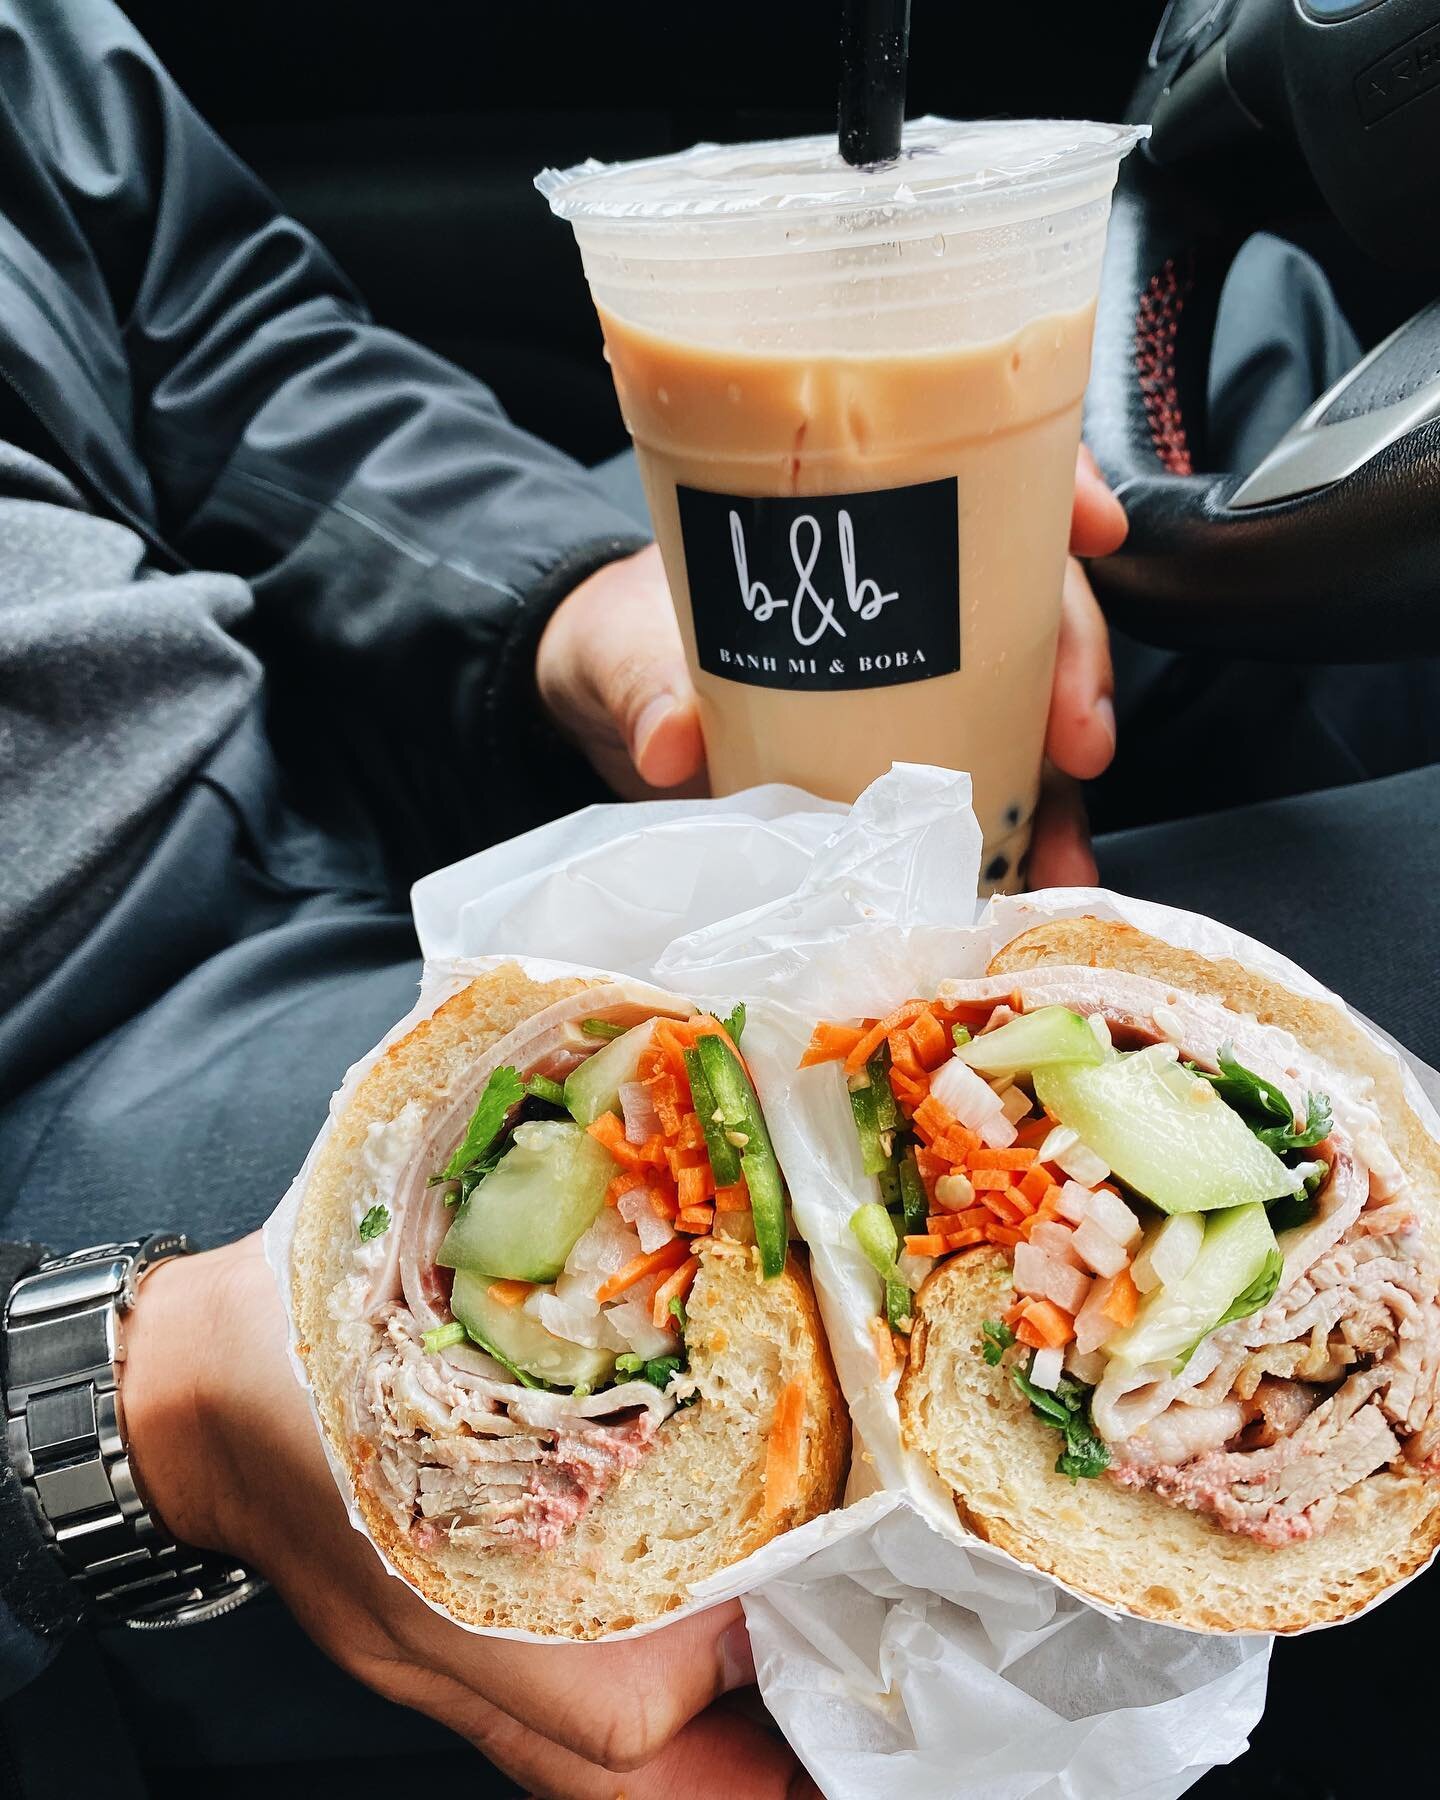 Saturday&rsquo;s are for sandwiches! 

Grab a pork sandwich @banhmi.boba &amp; head over to the park 🌳🧋🌞 

Link in bio to watch us eat ours! ✌🏽